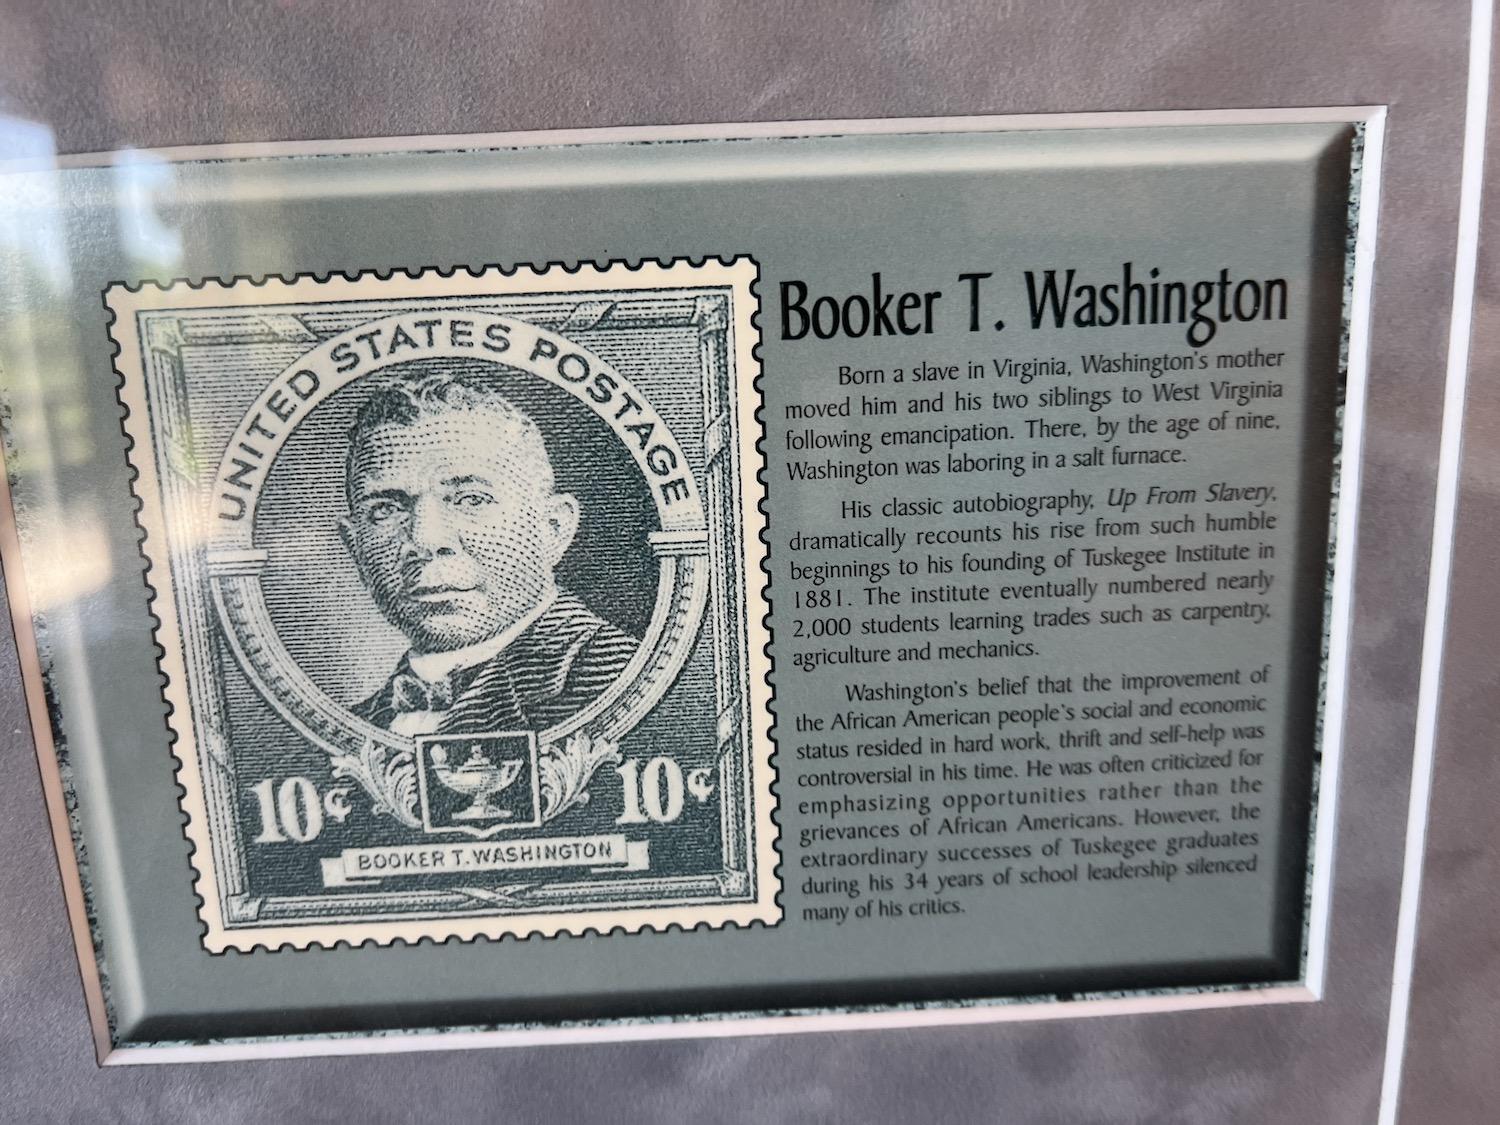 Booker T. Washington has been honored on stamps and coins.